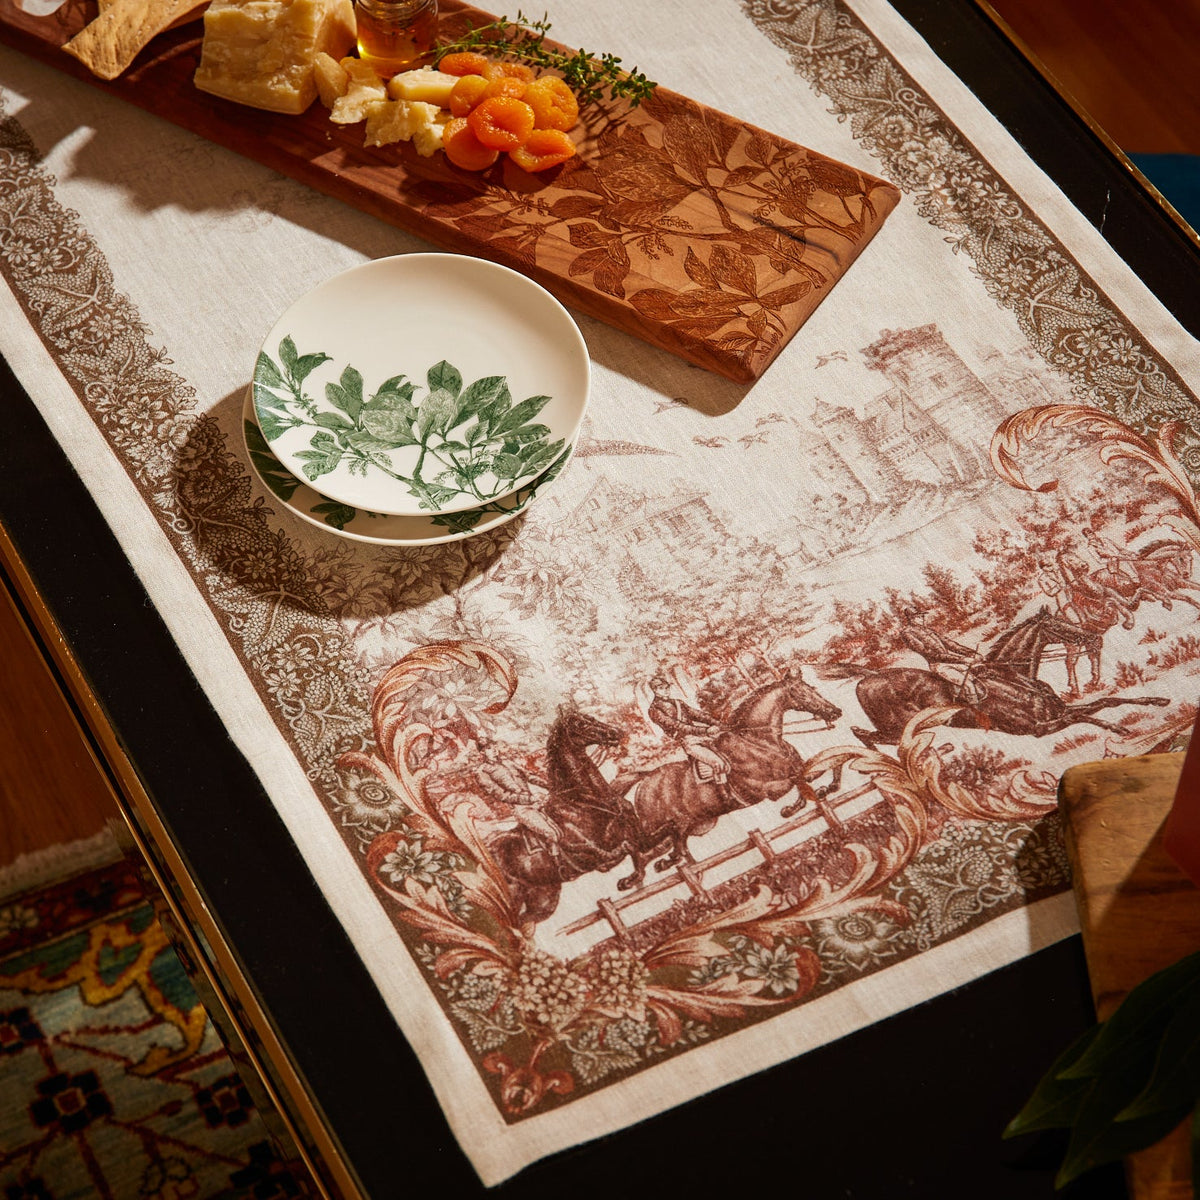 An Arbor Green Canapé Plates table runner adorned with a hand-drawn picture of a horse.